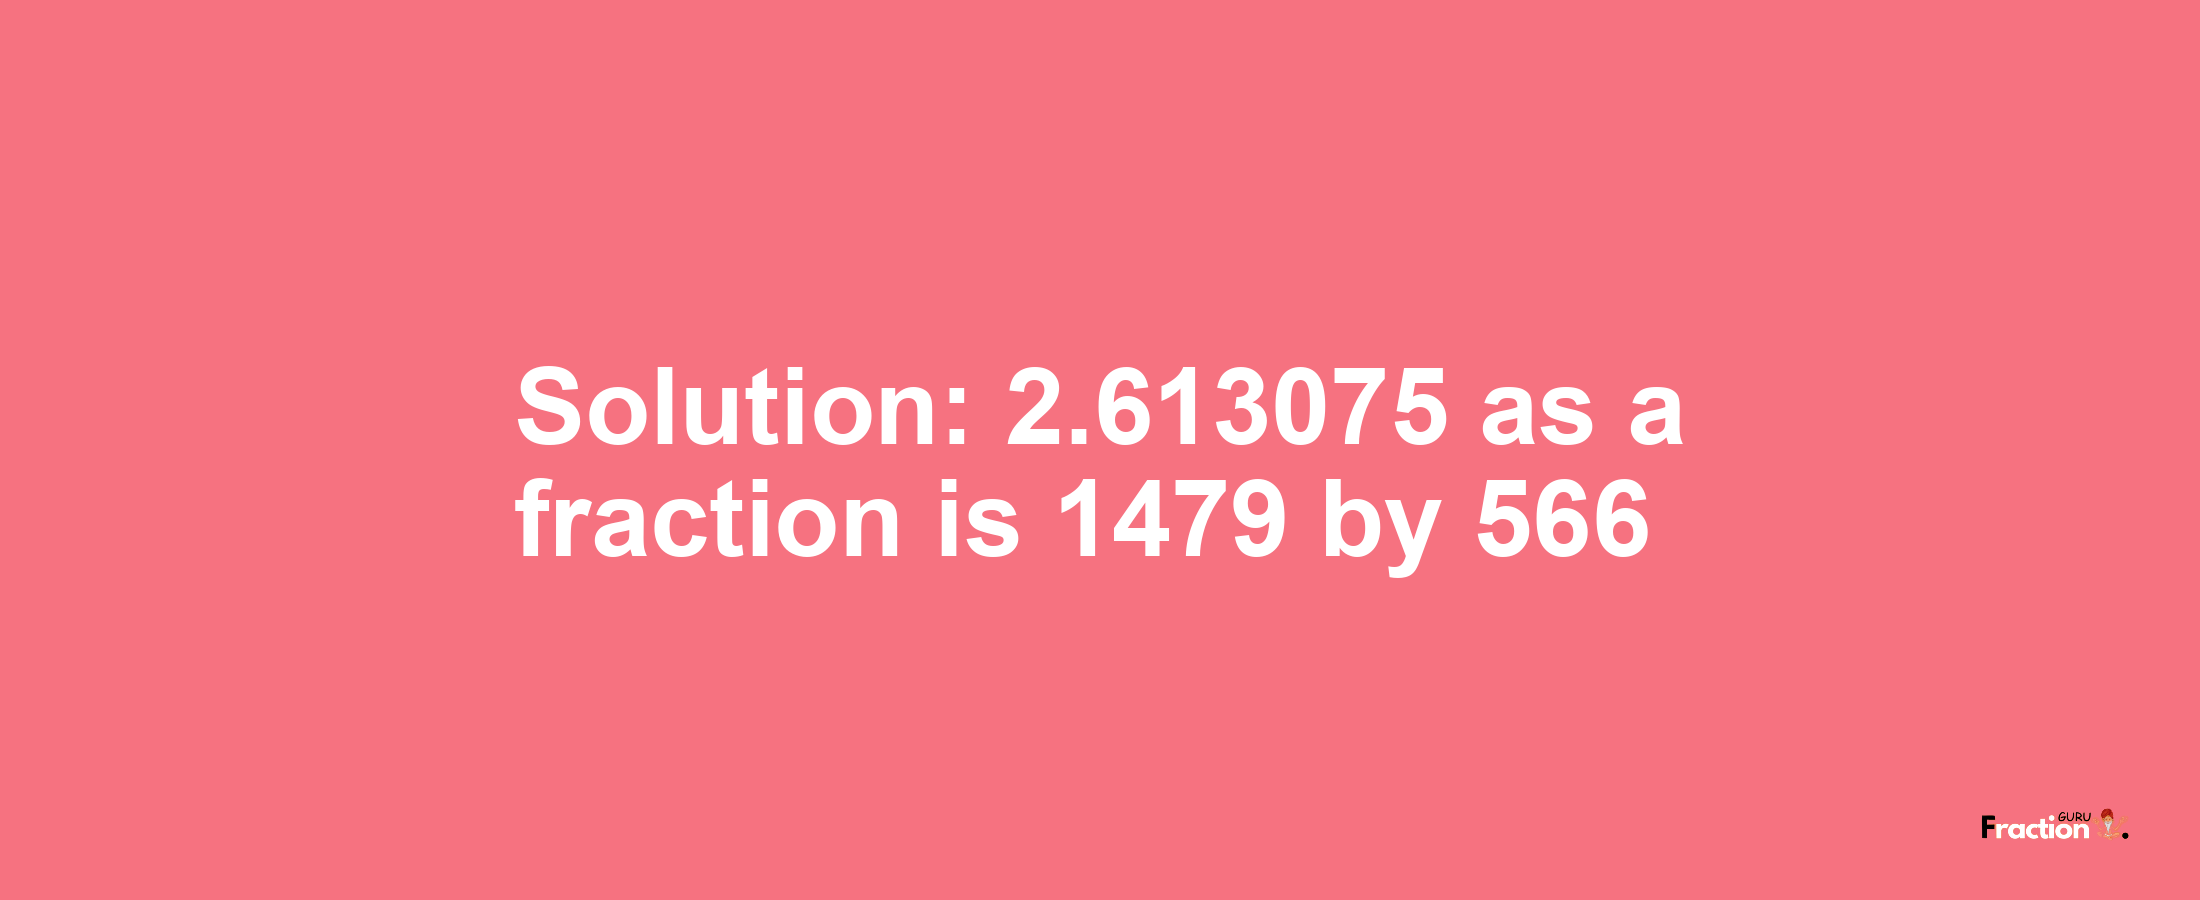 Solution:2.613075 as a fraction is 1479/566